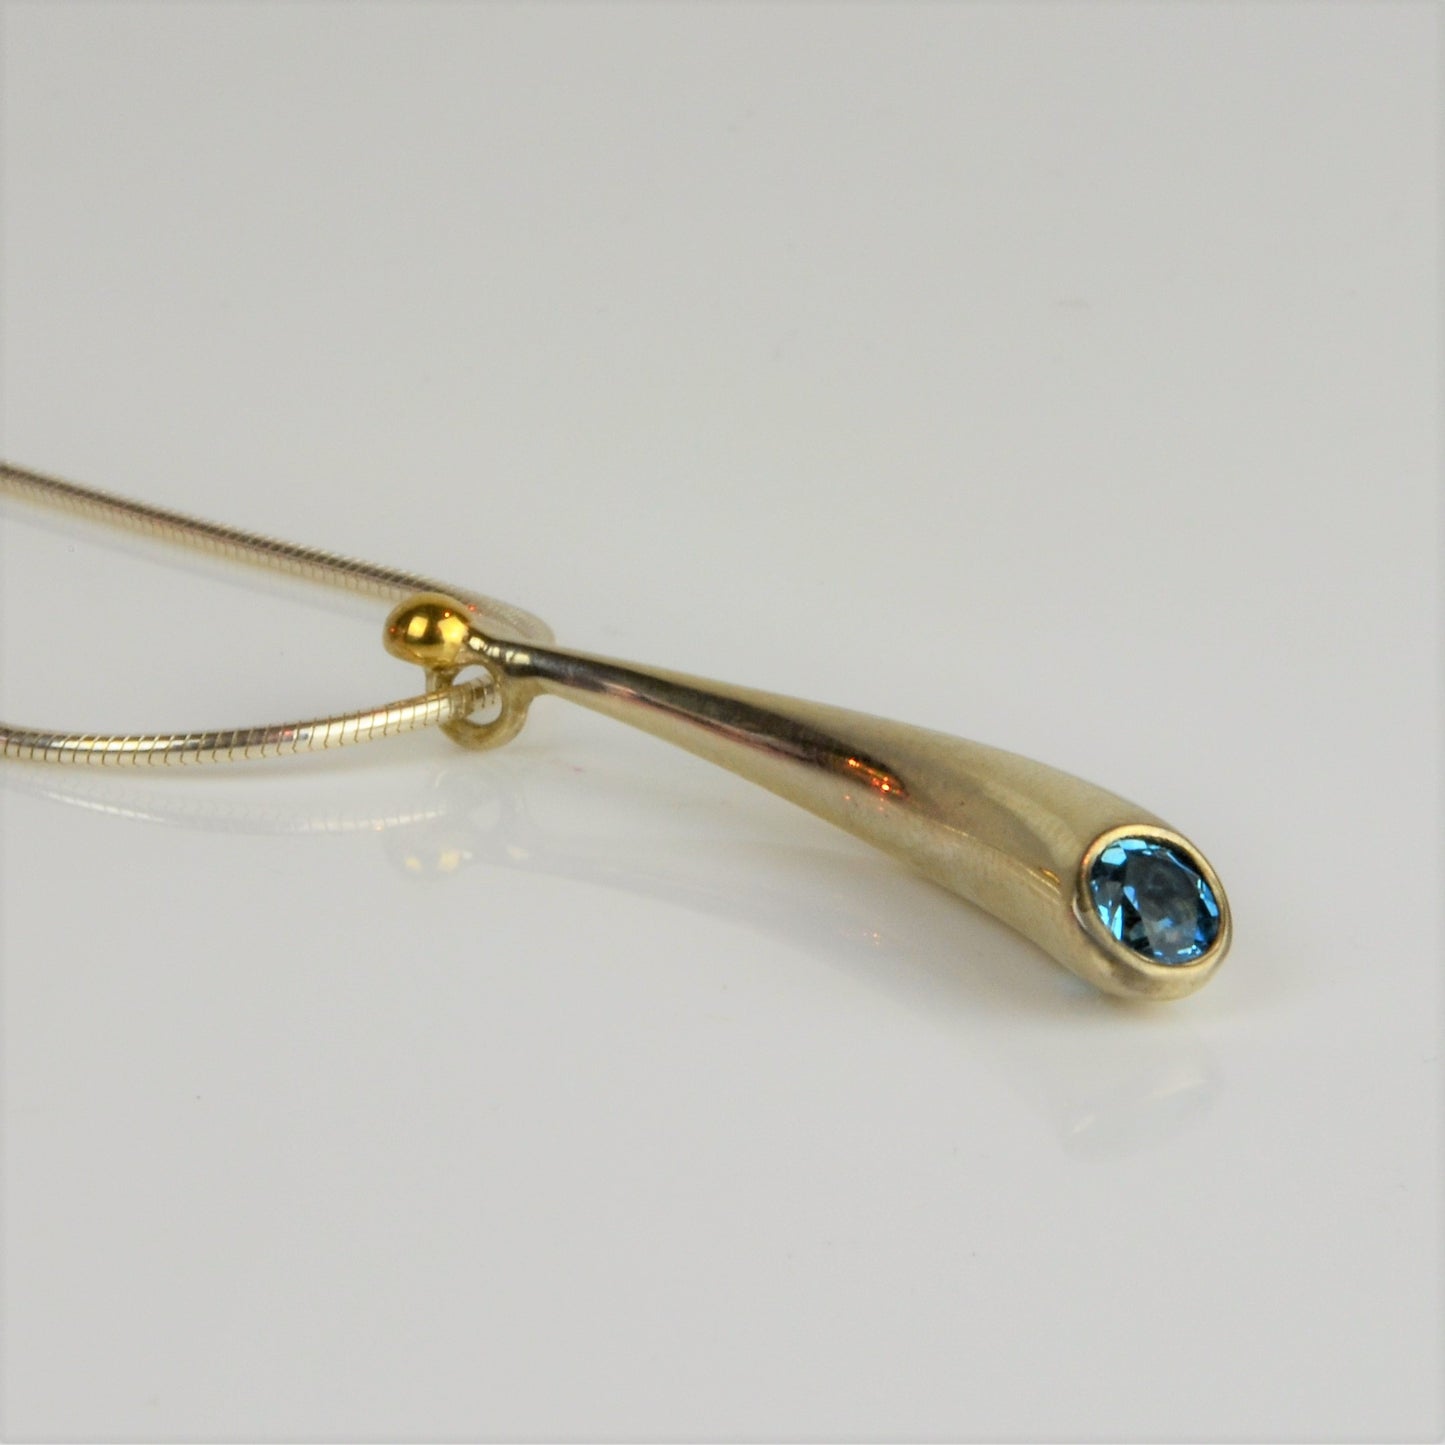 Finch, Paul – Silver and Topaz Pendant with Gold Detail | Paul Finch | Primavera Gallery